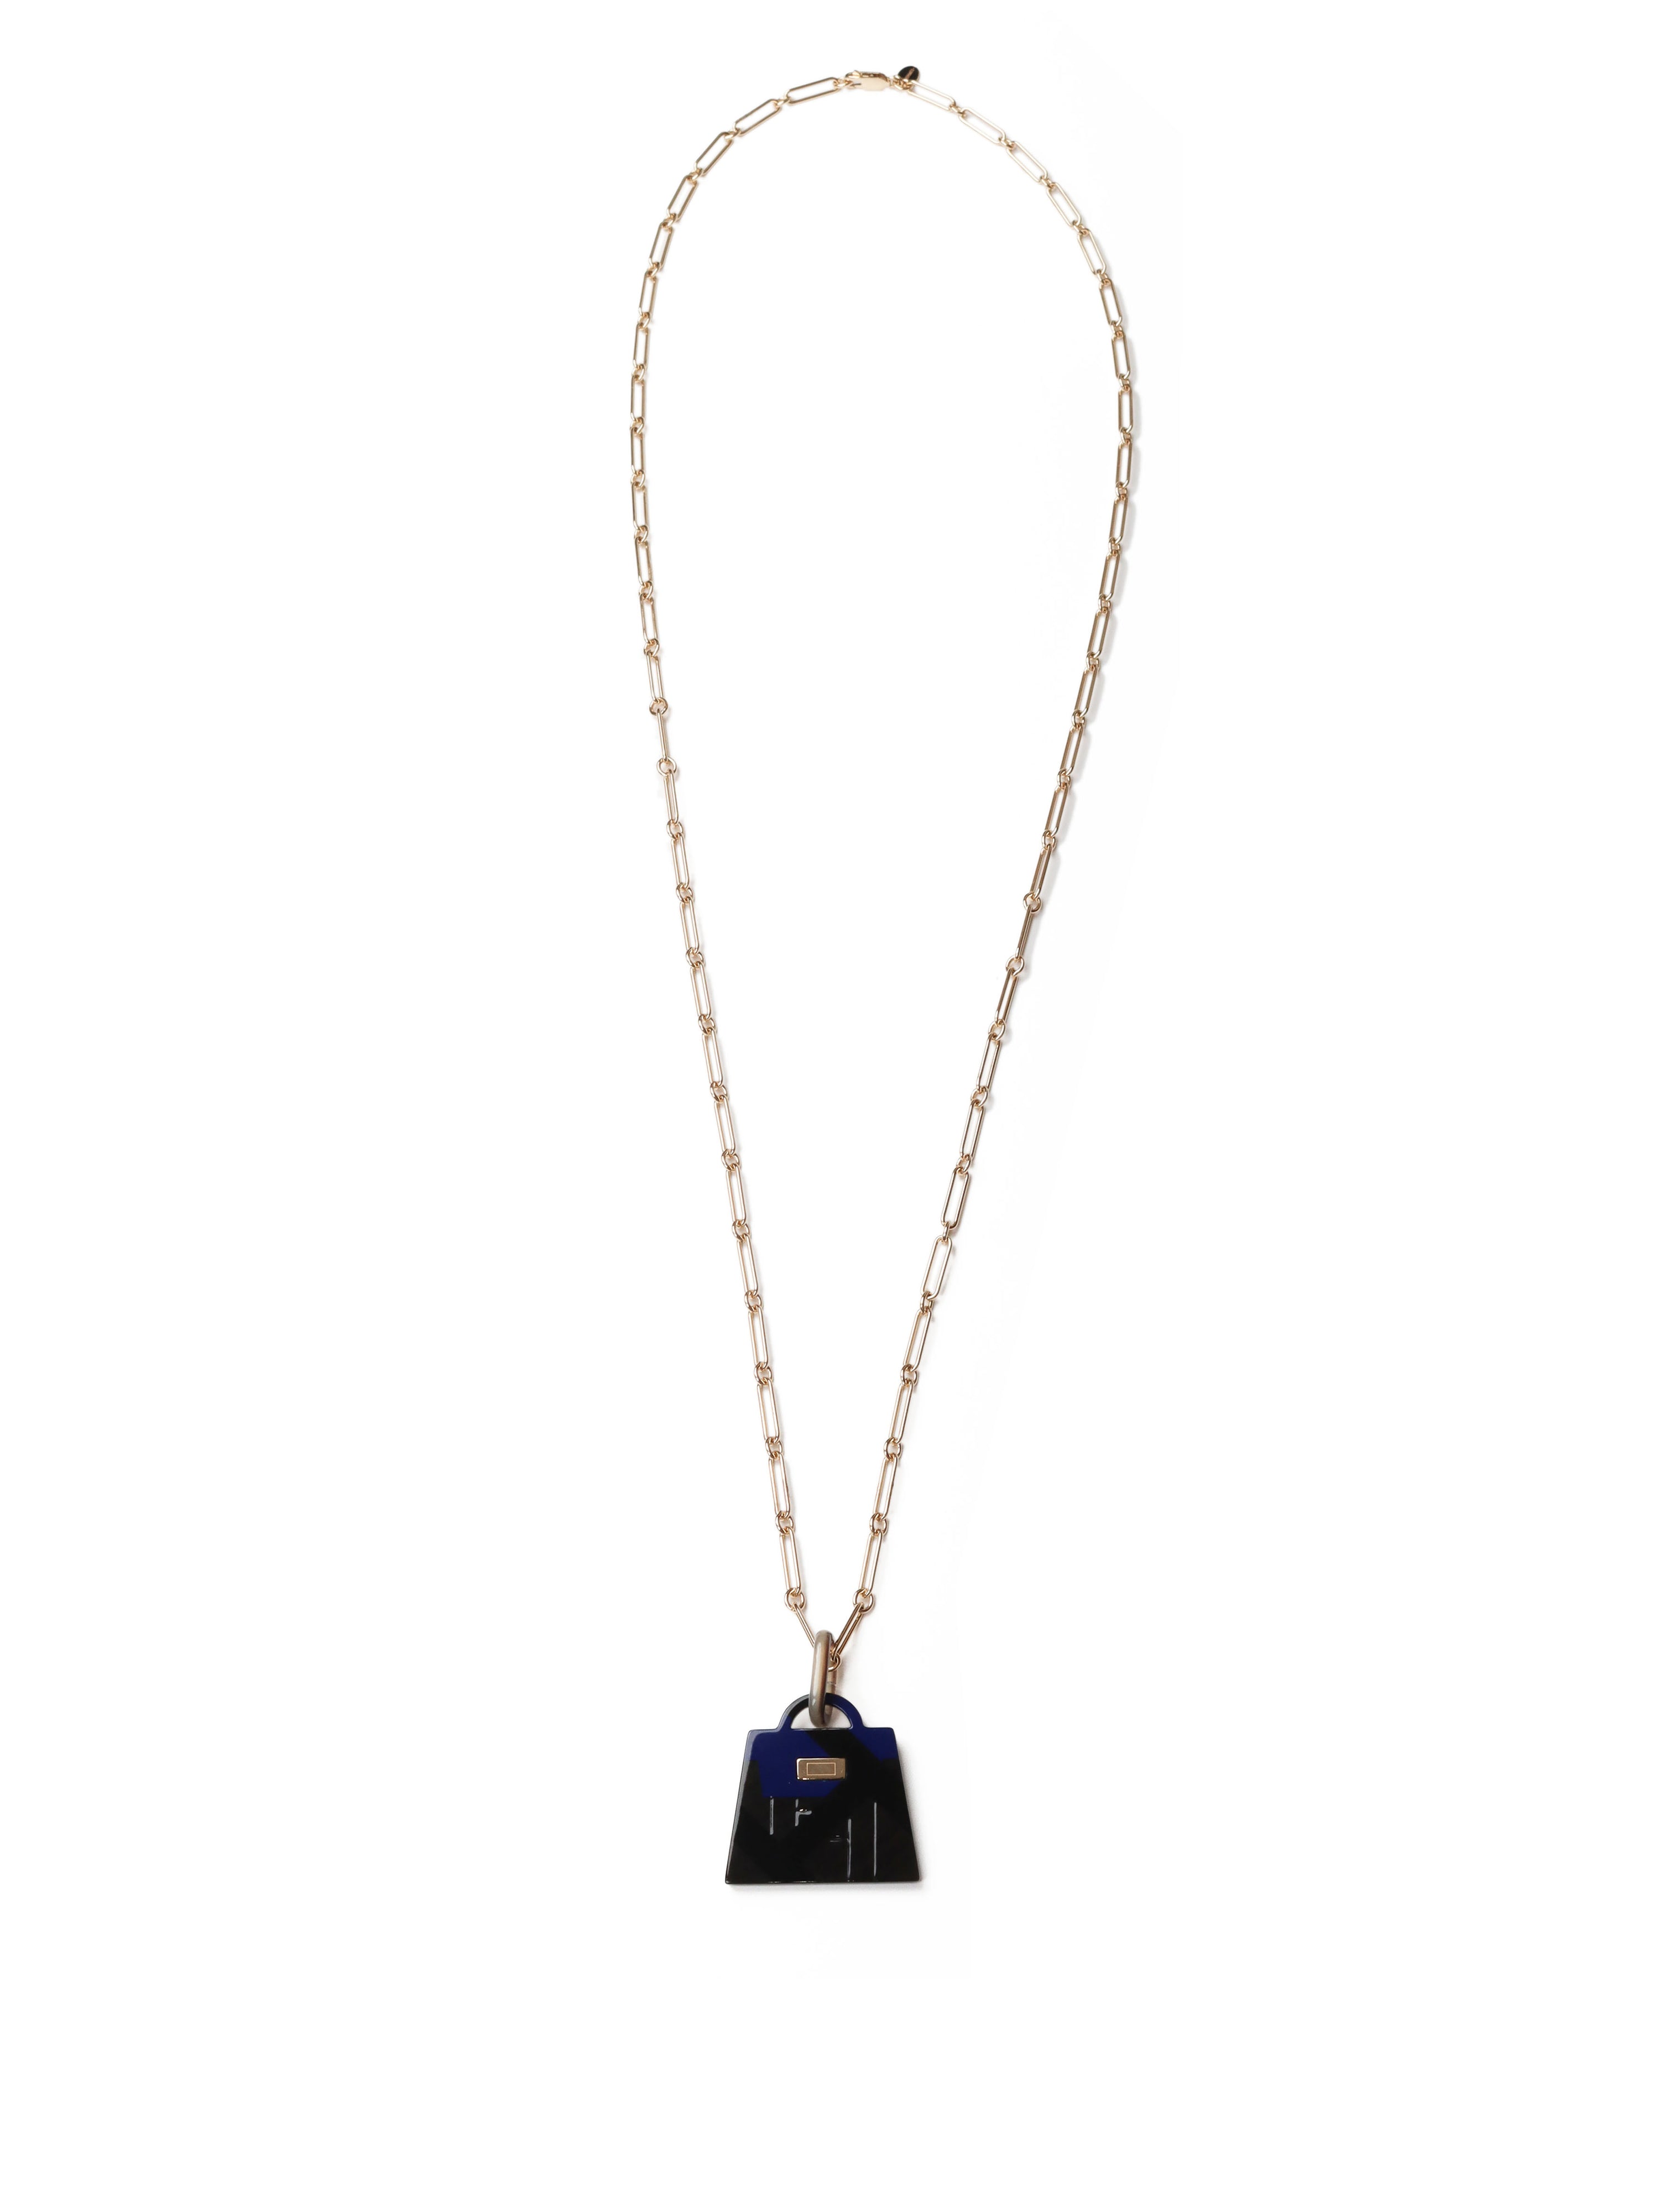 Hermes Amulette Laquee Kelly Pendant Necklace